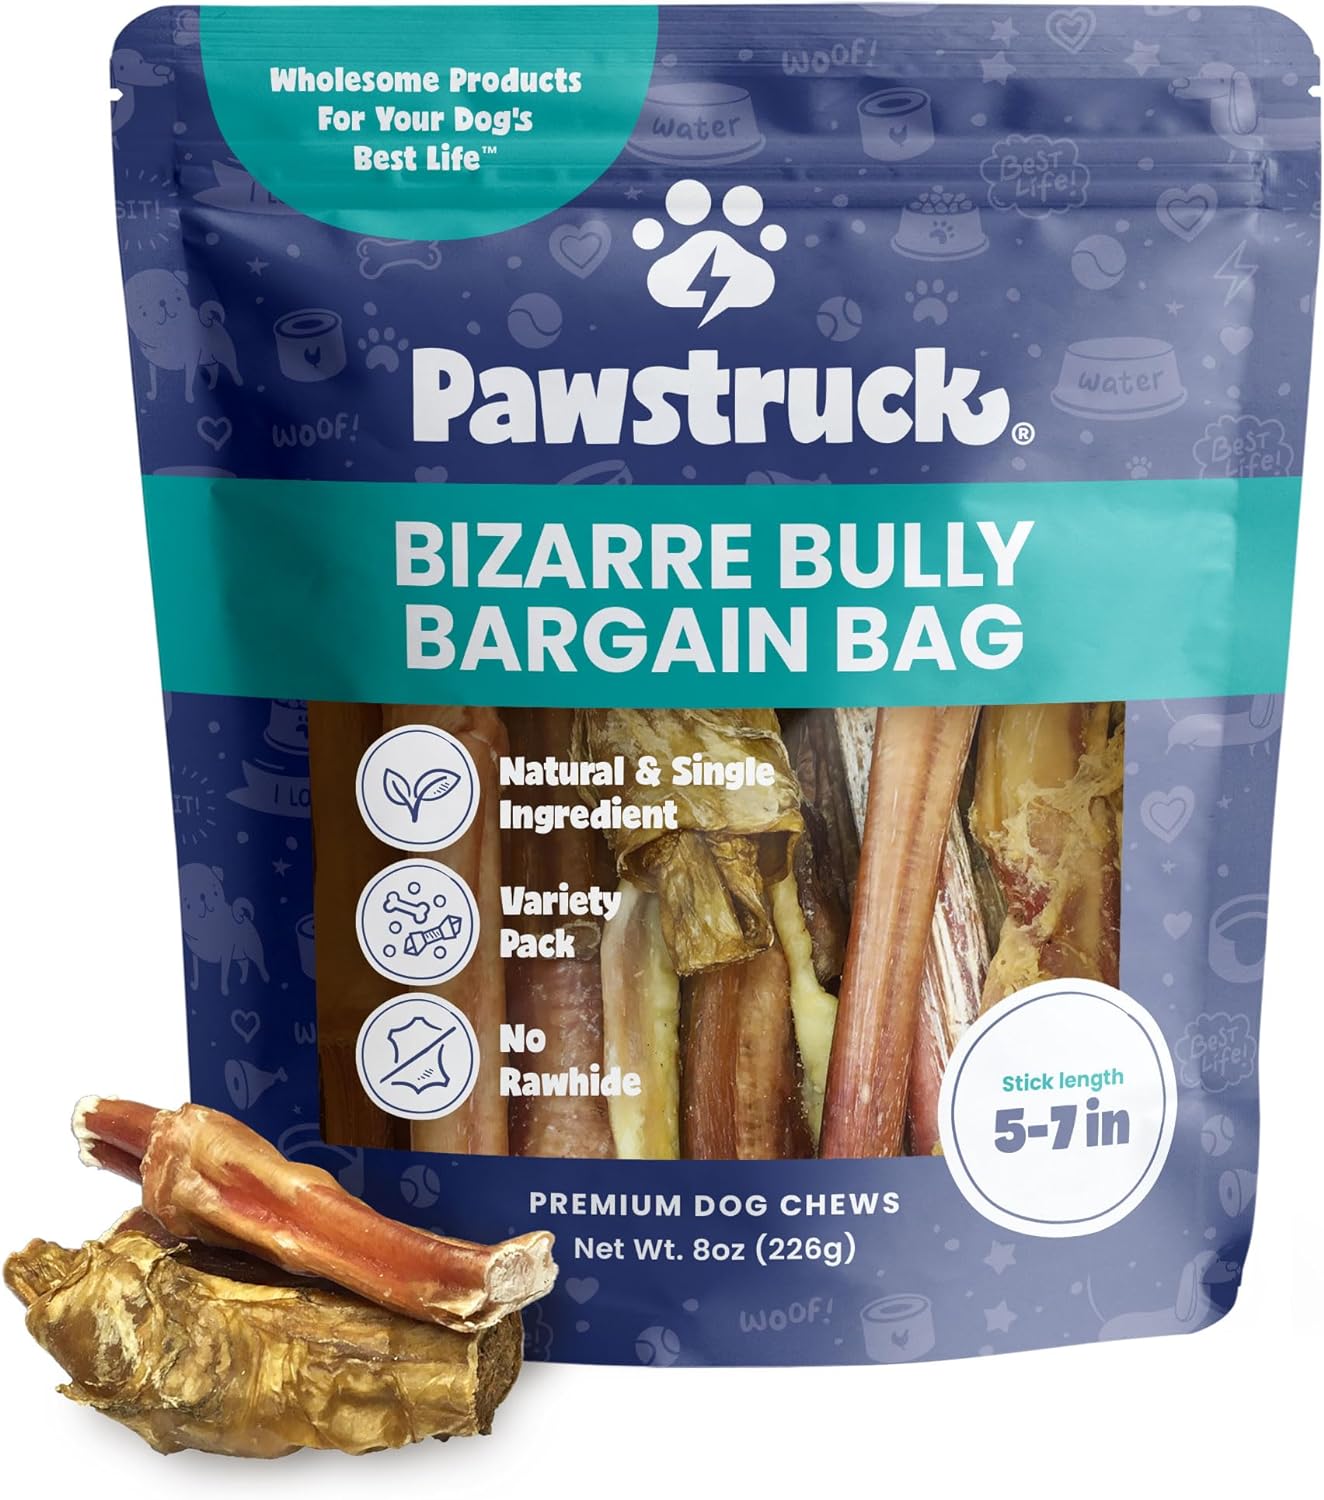 Pawstruck Natural Bizarre Bully Sticks Bargain Bag for Dogs & Puppies - Variety Pack of 5-7" Long Lasting Eco-Conscious Beef Chew Treats - 8 oz. Bag - Packaging May Vary